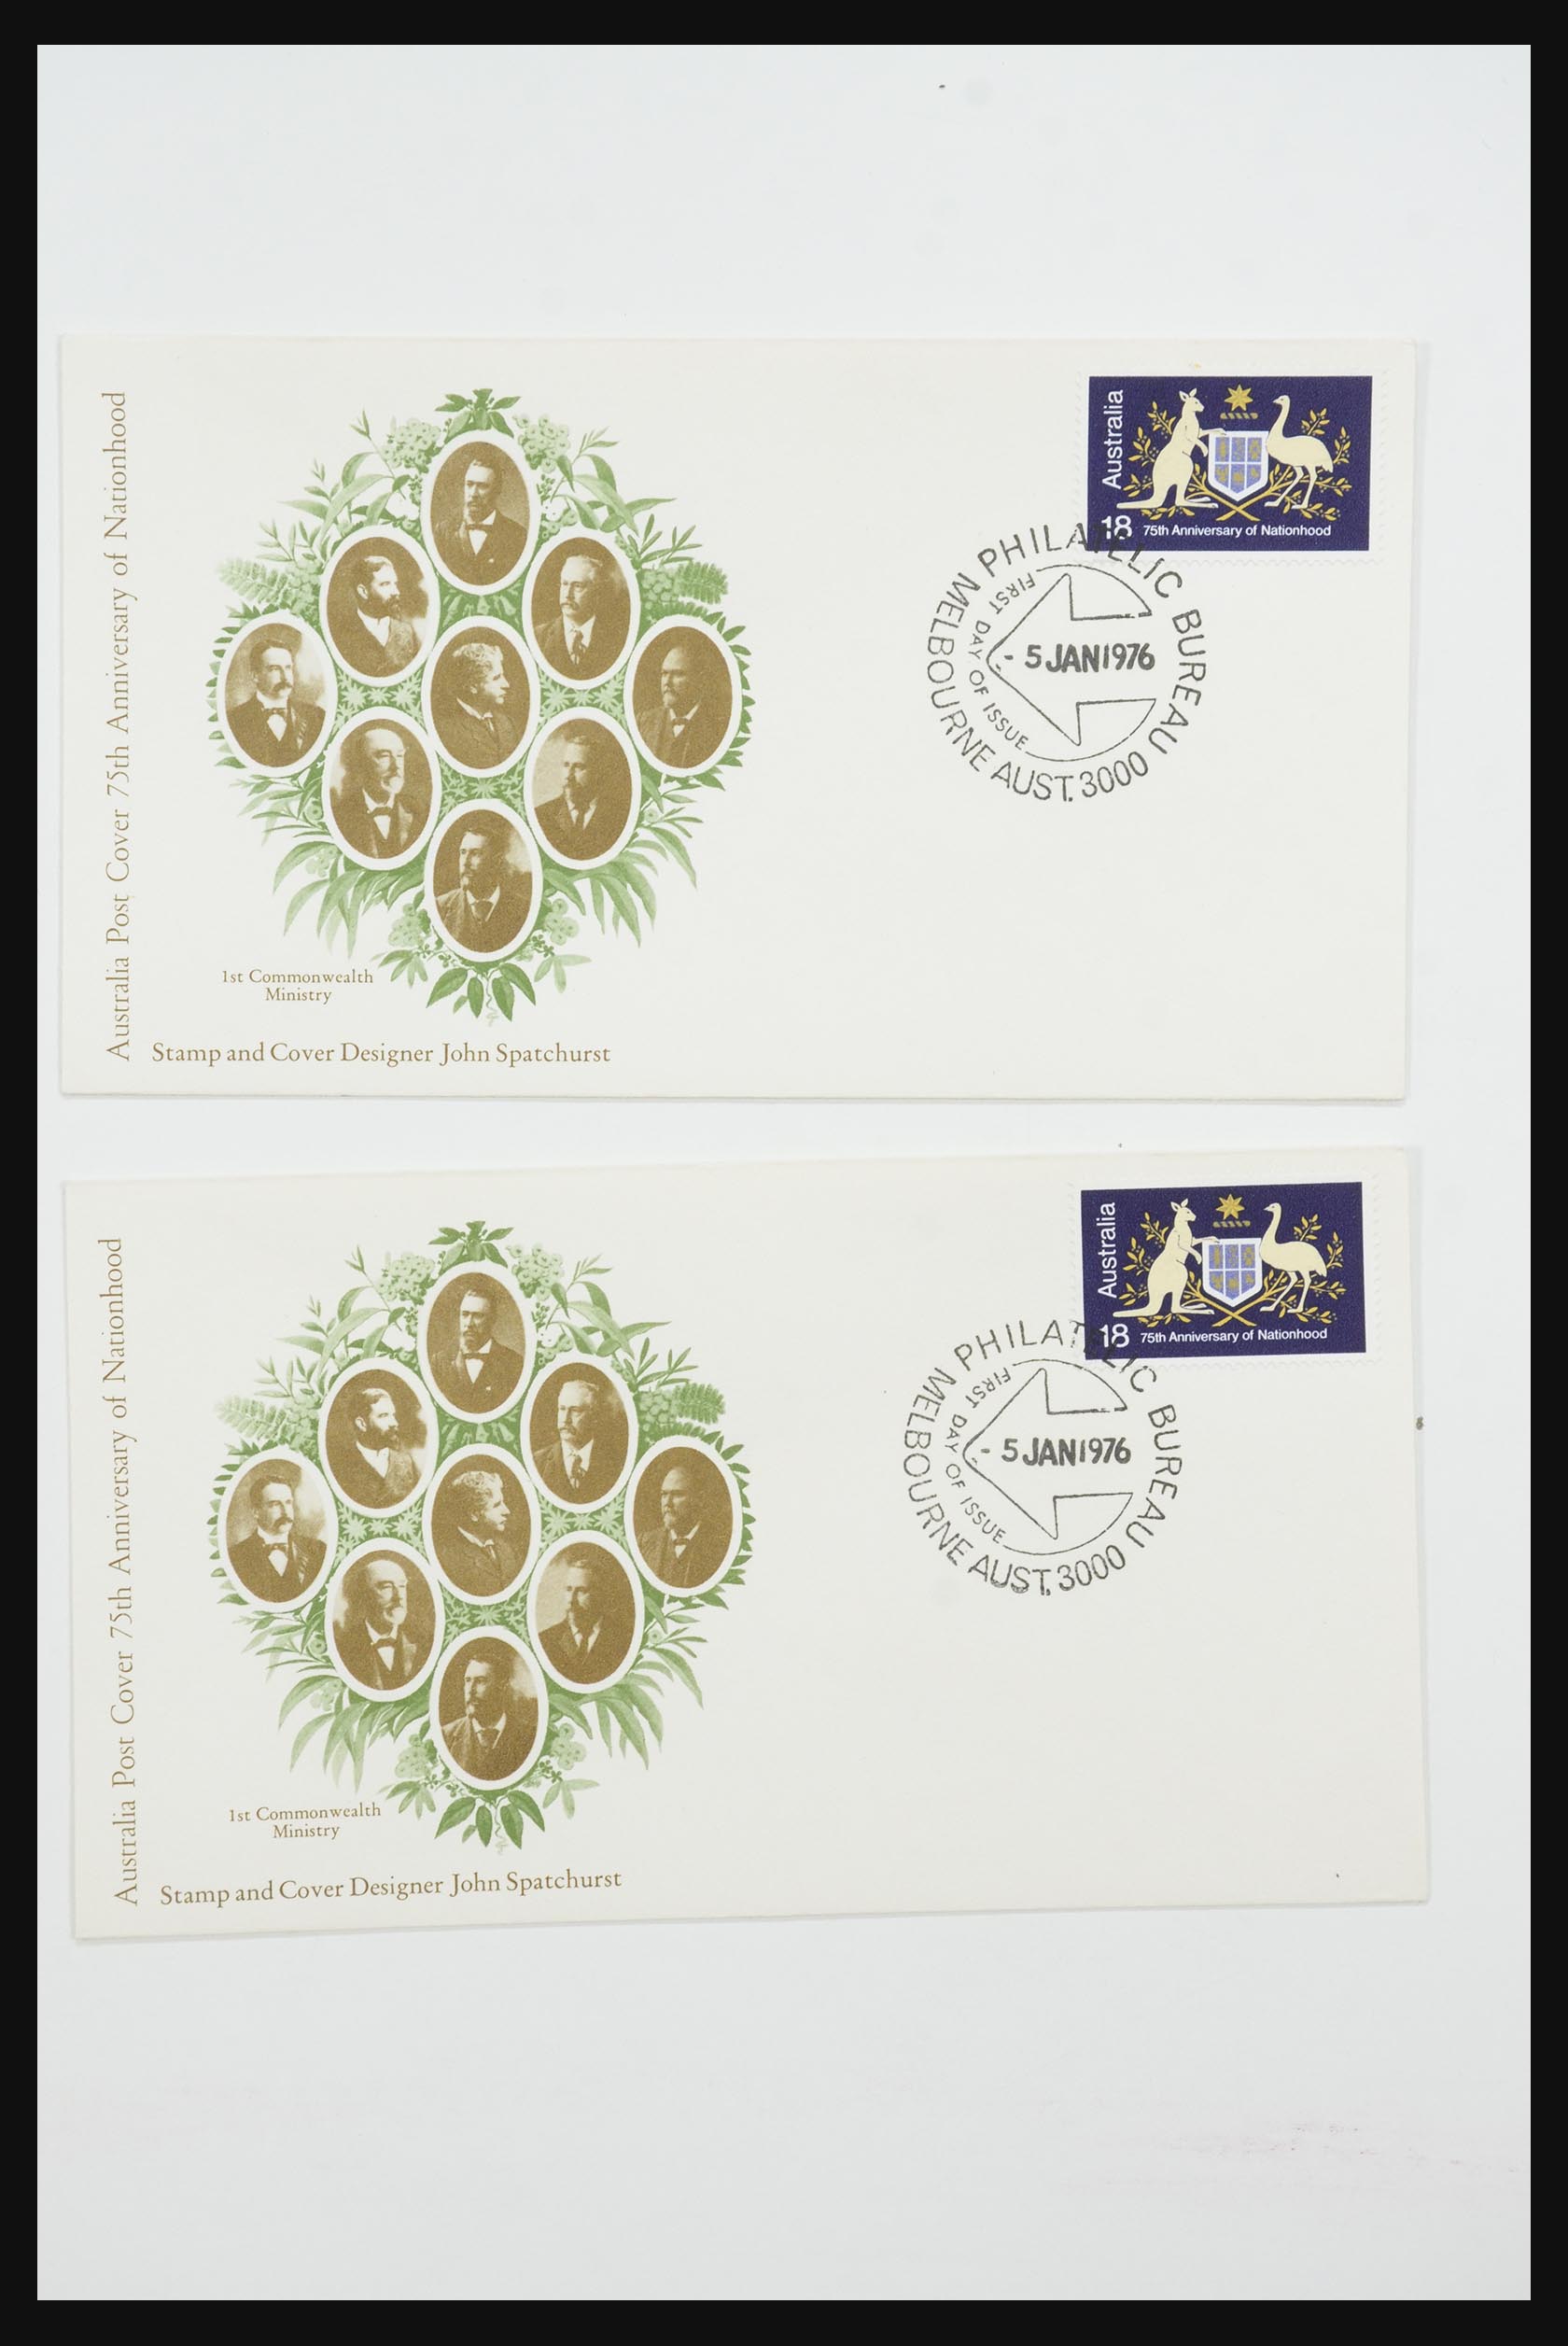 31726 089 - 31726 Great Britain and colonies covers and FDC's 1937-2001.